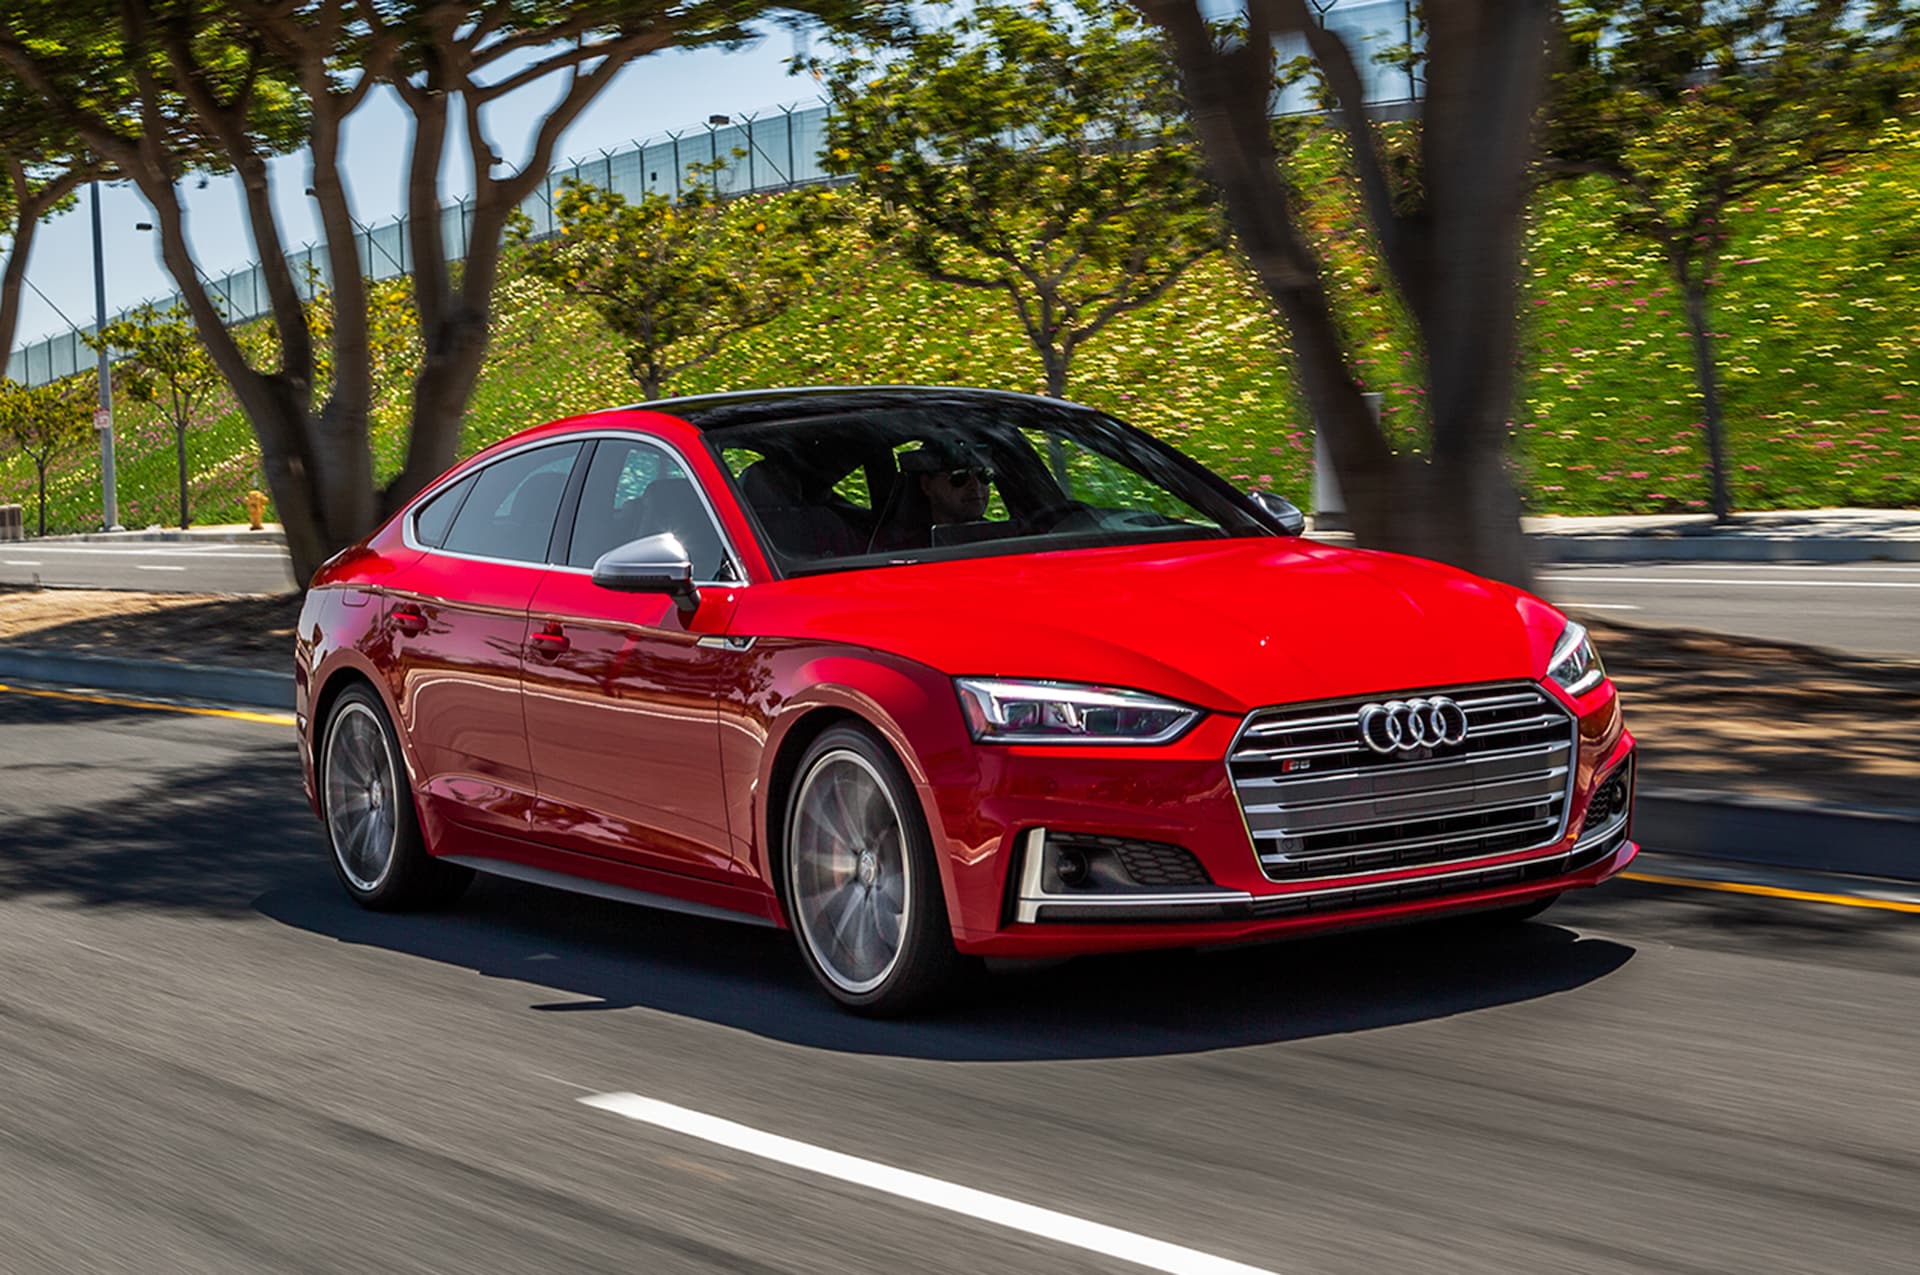 2018 Audi S5 Sportback First Test: A Little More Indulgent